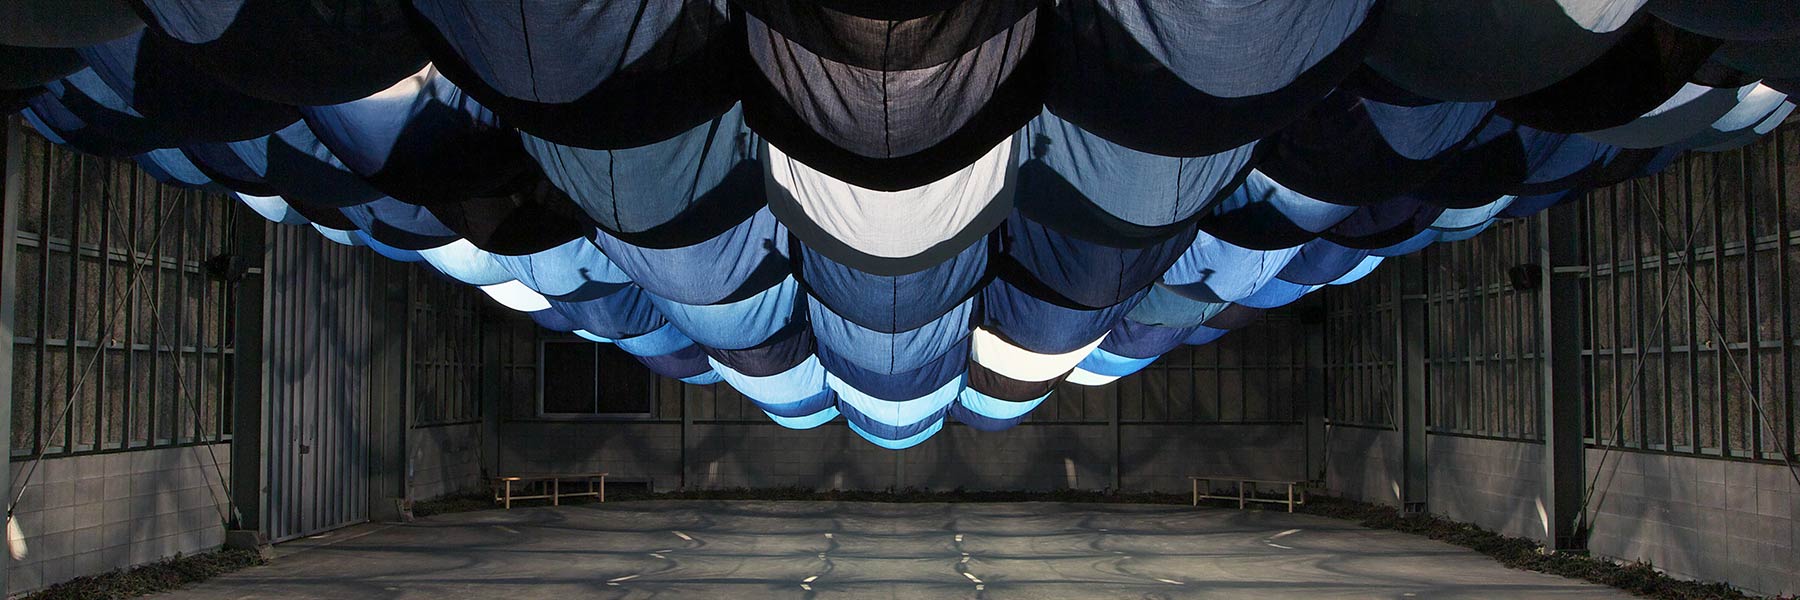 Ballooning blue fabric on ceiling